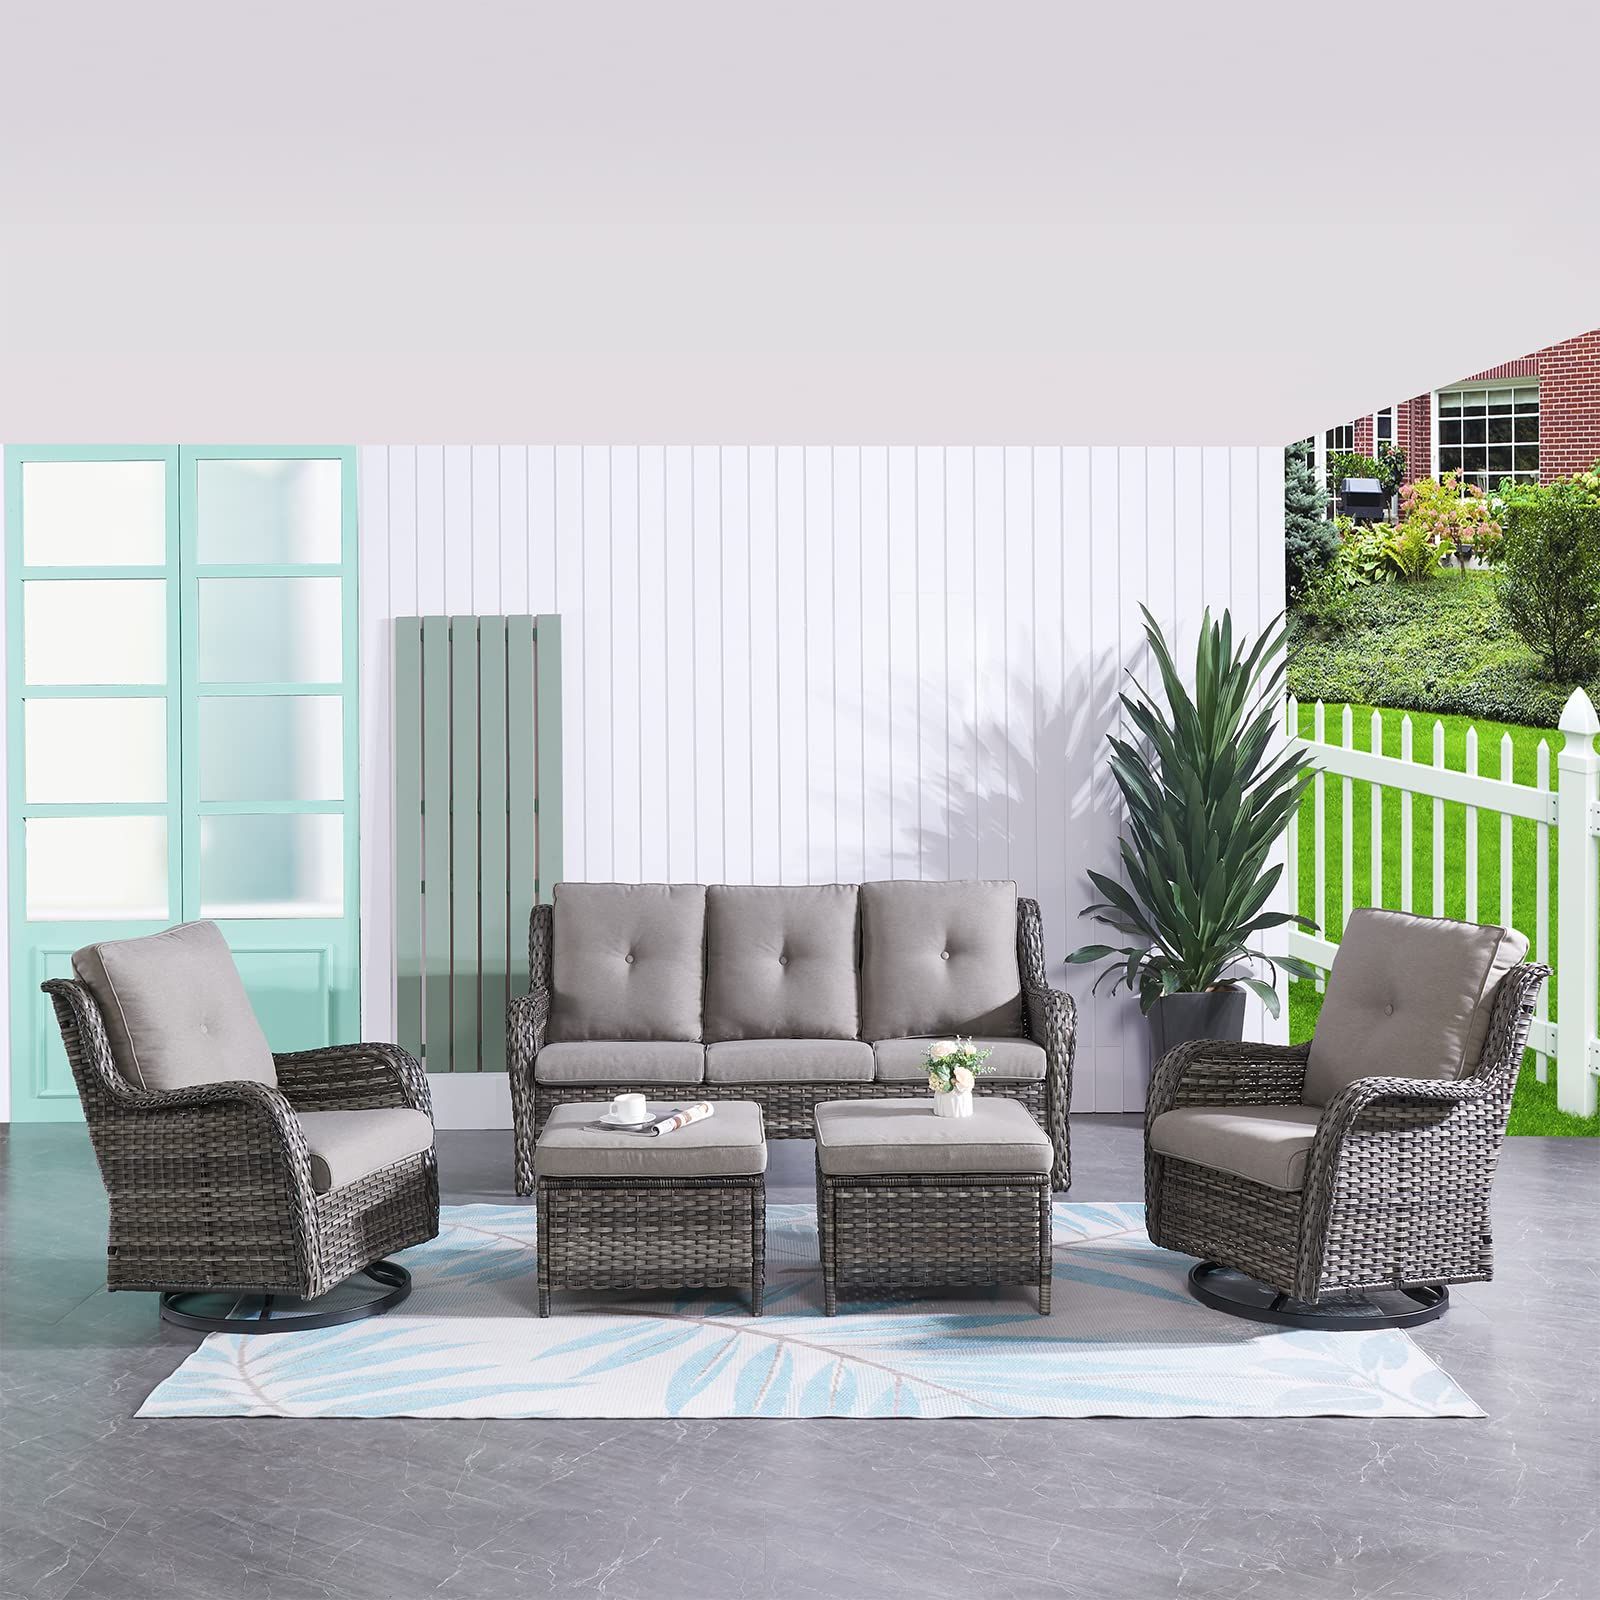 Most Recent Ottomans Patio Furniture Set In Amazon: Hummuh 5 Pieces Outdoor Furniture Patio Furniture Set Wicker  Outdoor Sectional Sofa With Swivel Rocking Chairs,patio Ottomans : Patio,  Lawn & Garden (Photo 2 of 15)